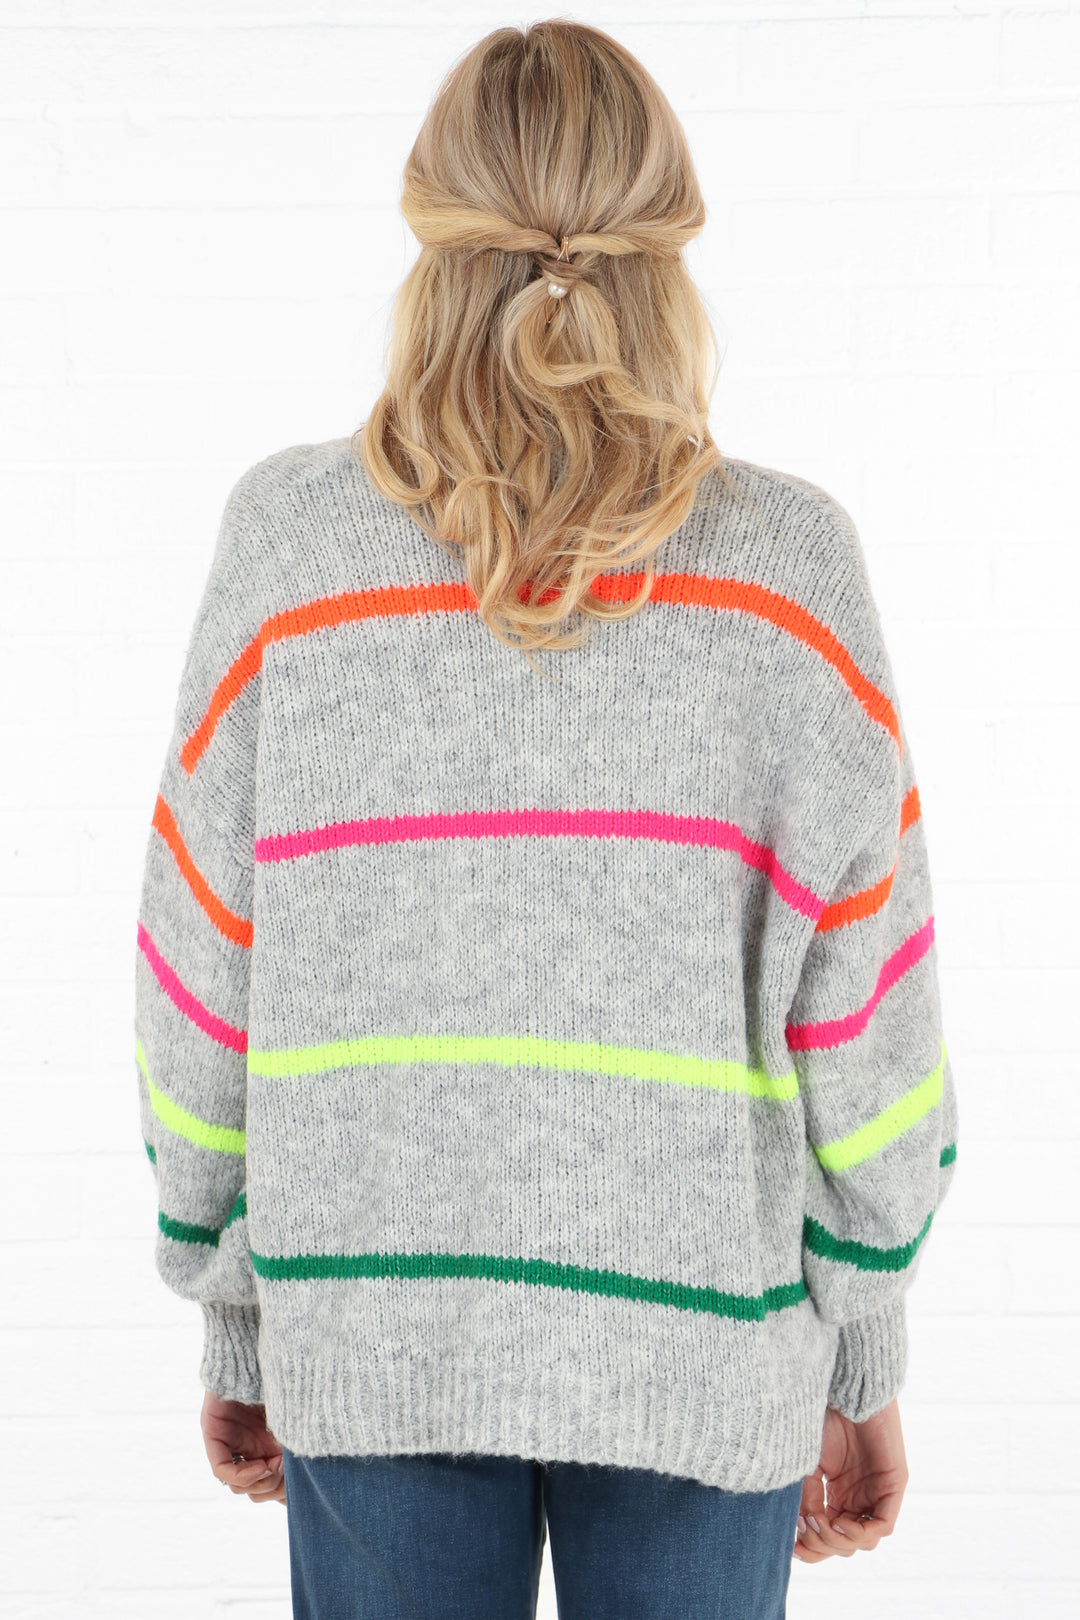 model showing the back of the grey cardigan with a multicoloured stripe pattern, stripes are green, yellow, pink and orange